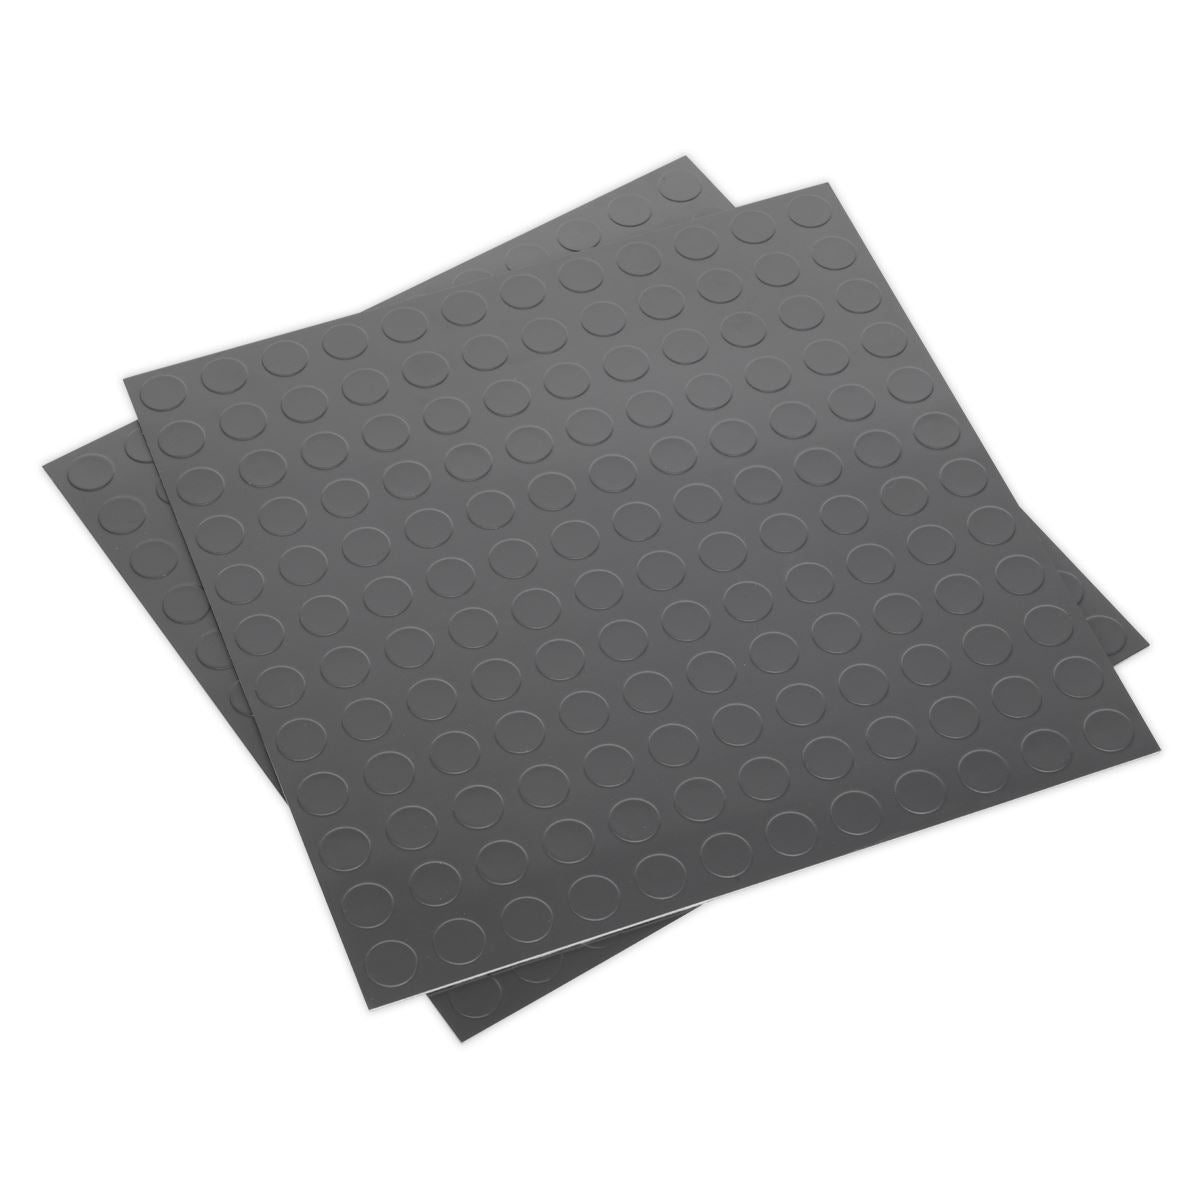 Sealey Vinyl Floor Tile with Peel & Stick Backing - Silver Coin Pack of 16